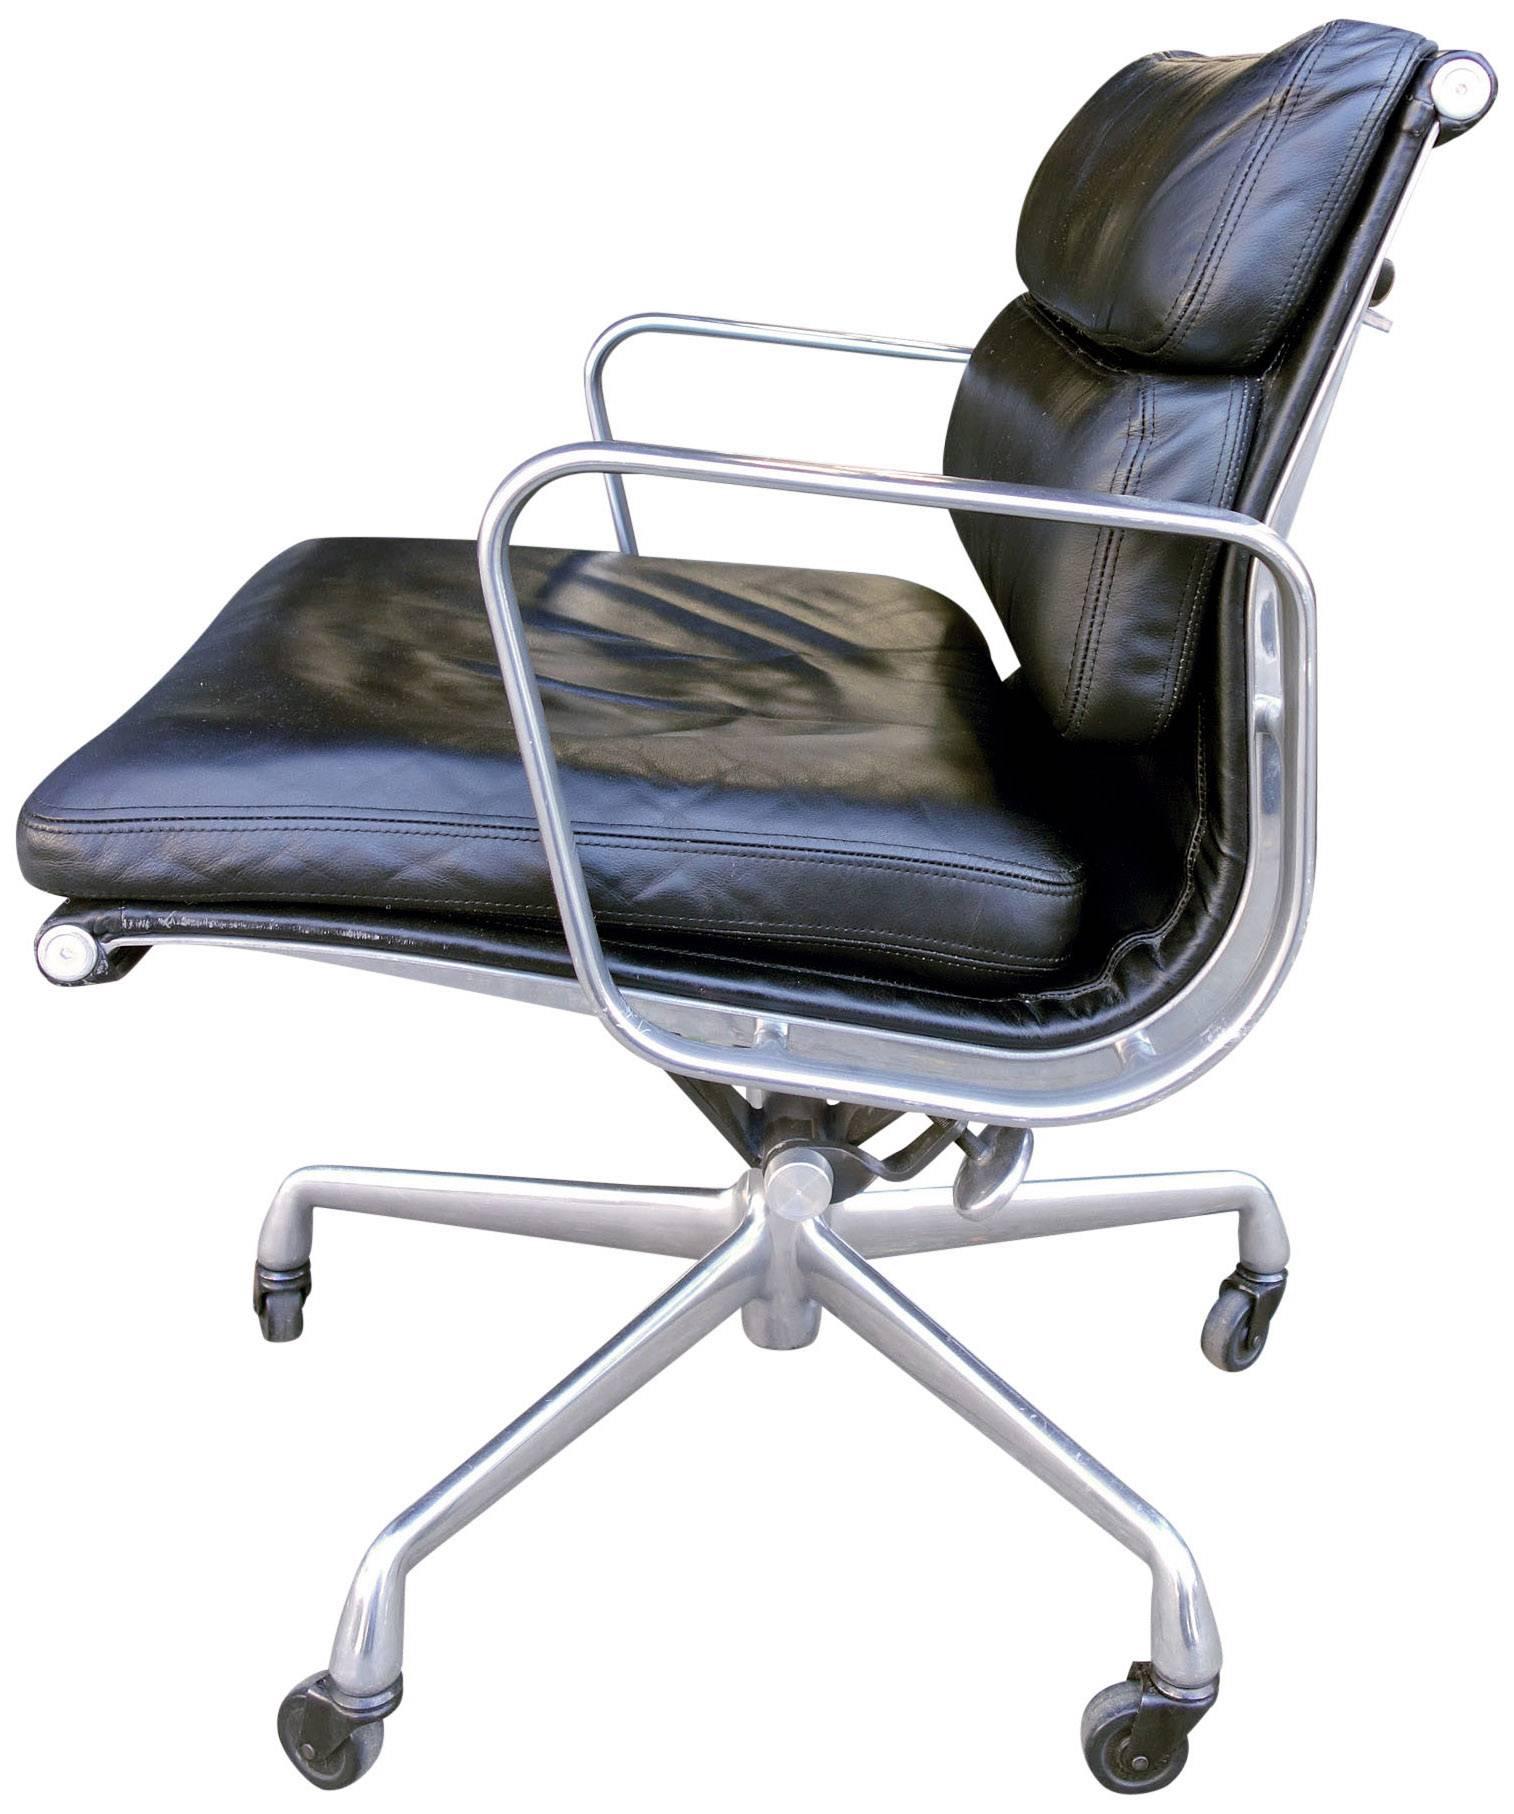 For your consideration we have Eames for Herman Miller vintage soft pad chairs in black leather with low backs. 

These authentic vintage examples are icons of Mid-Century Modern design. The chairs part of the Eames aluminium group designed for